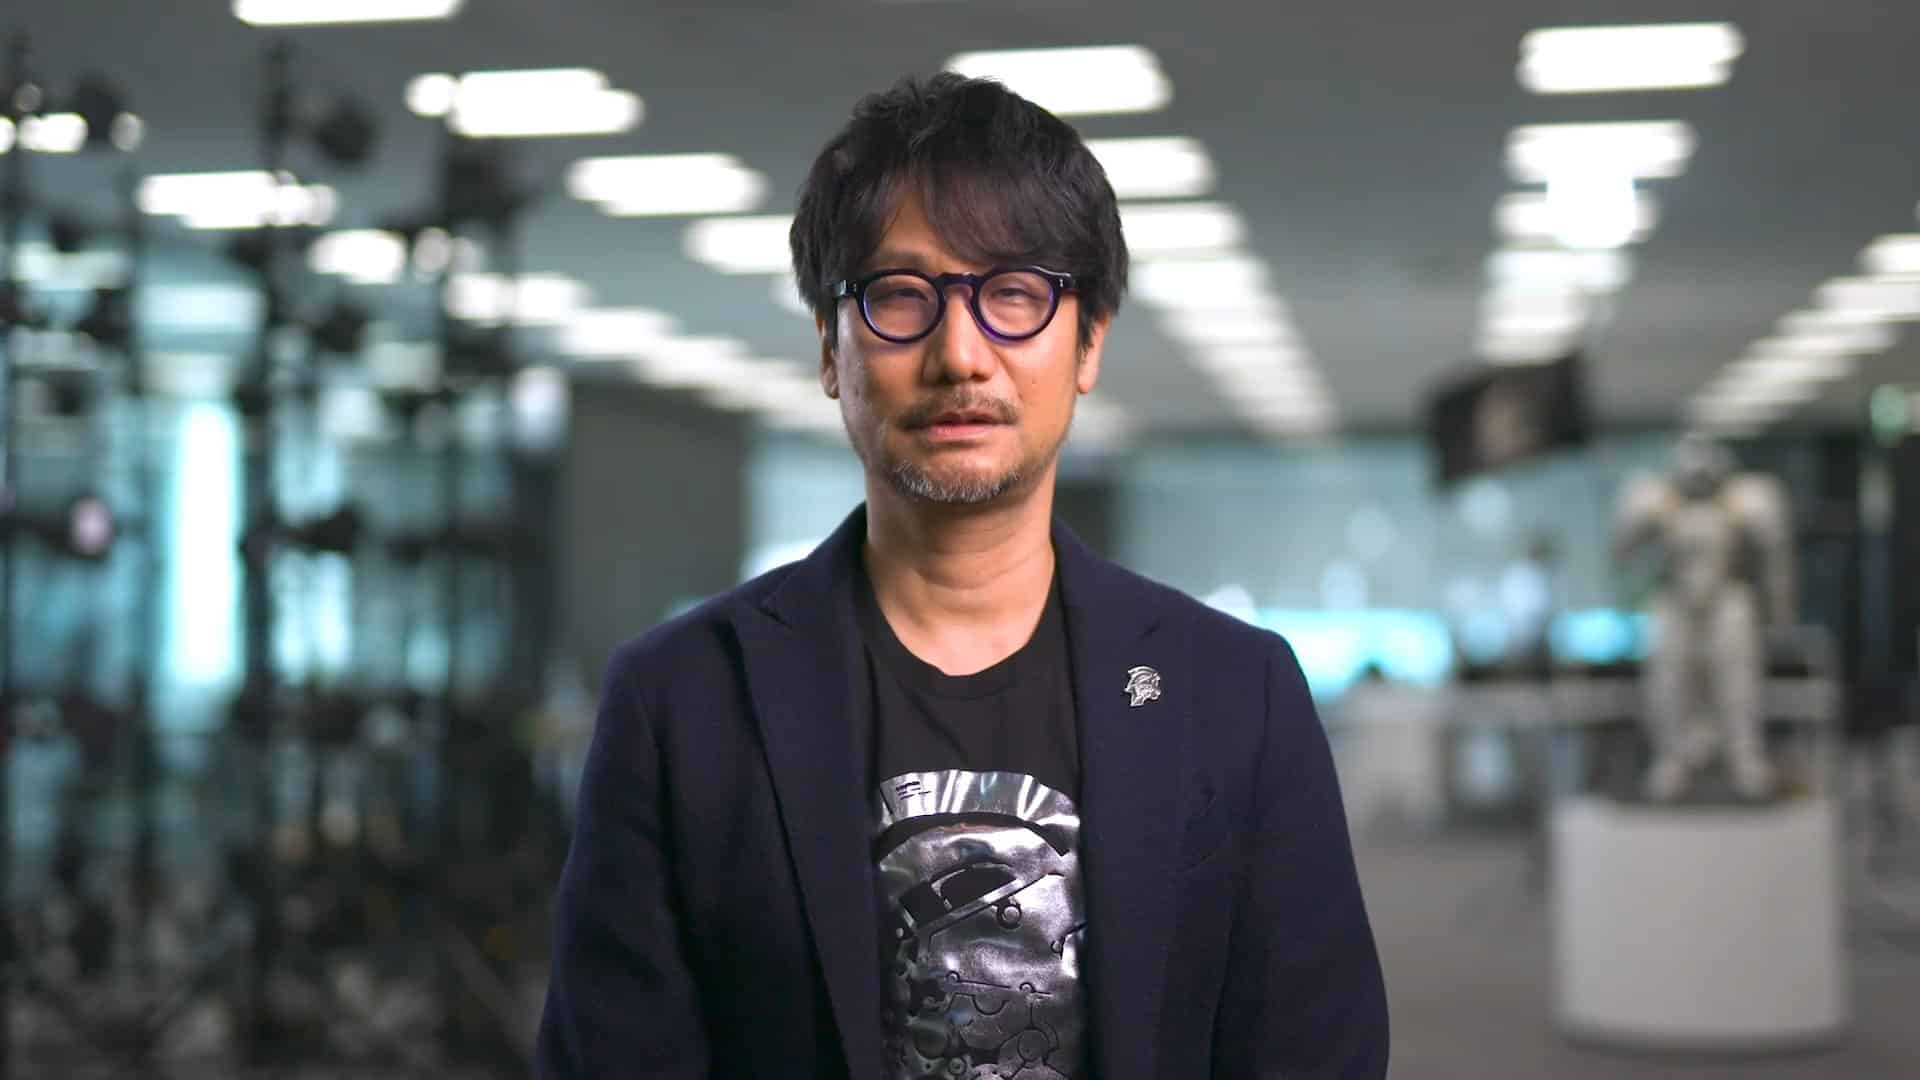 Hideo Kojima Reportedly Developing New Horror Game –